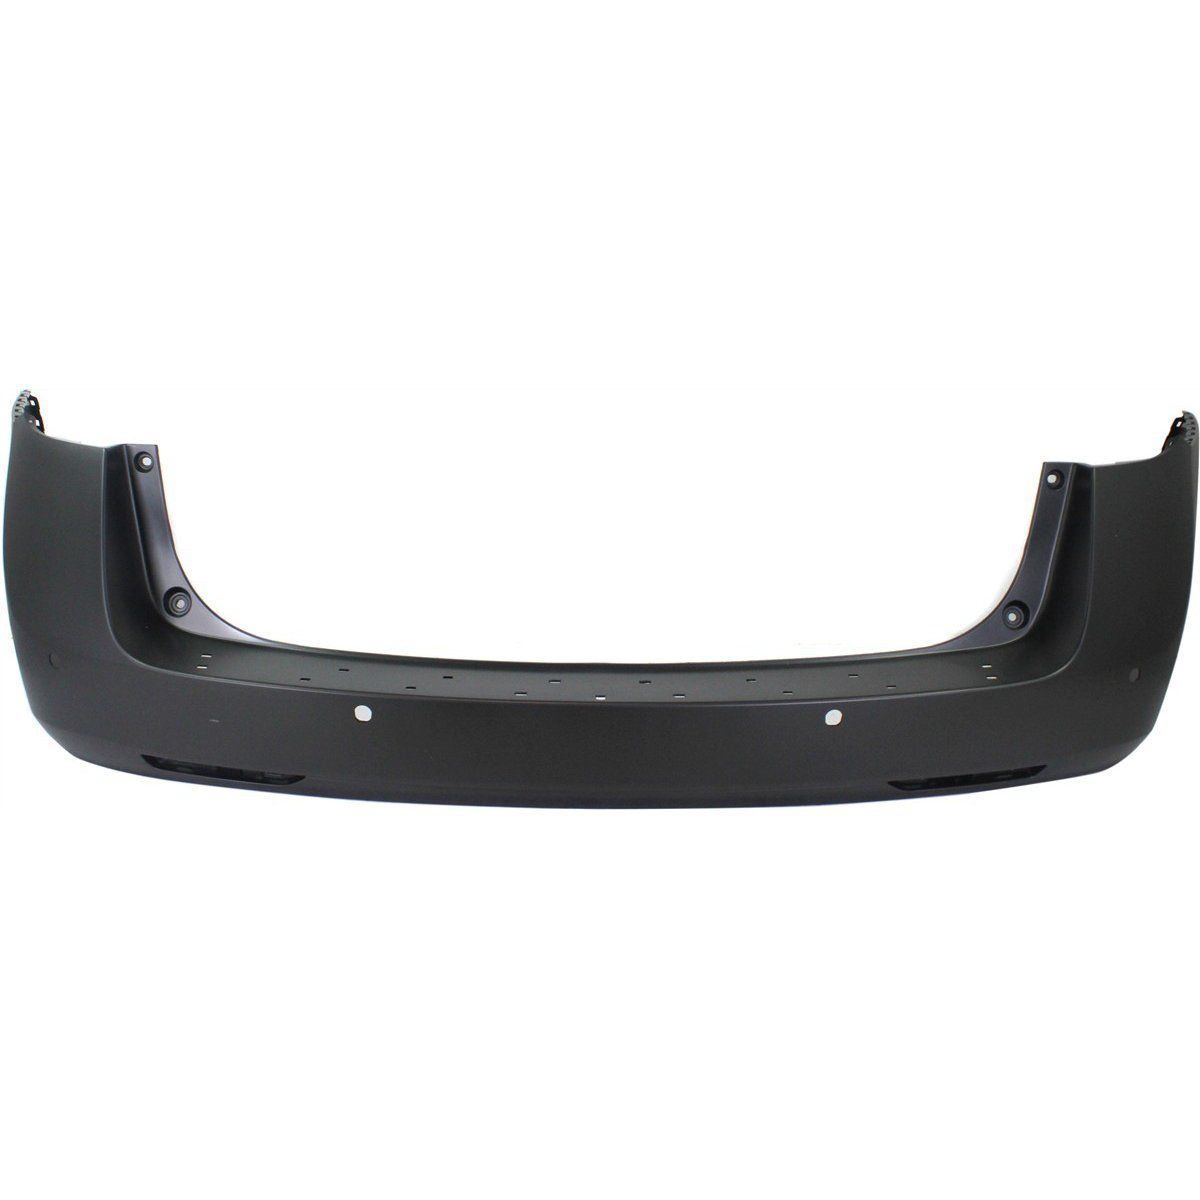 2011-2016 HONDA ODYSSEY Rear Bumper Cover BASE|TOURING|TOURING ELITE Painted to Match